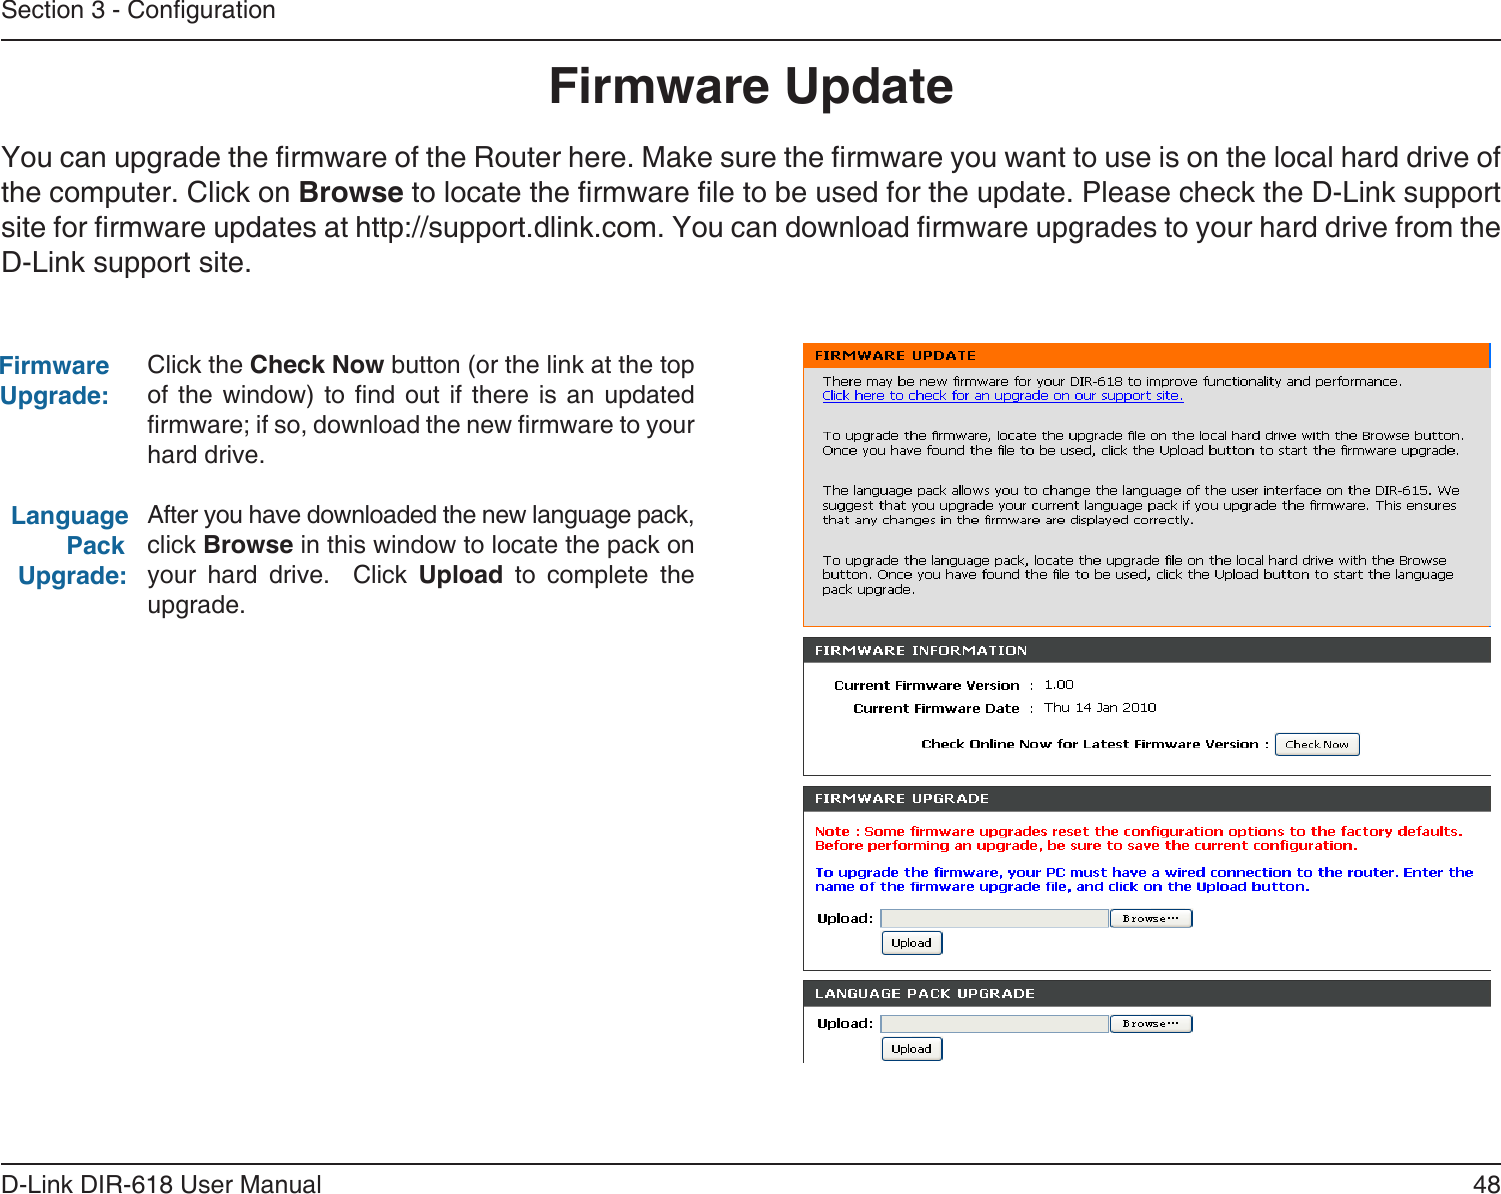 48D-Link DIR-618 User ManualSection 3 - CongurationFirmware UpdateClick the Check Now button (or the link at the topof the window) to nd out if there is an updated rmware; if so, download the new rmware to your hard drive.After you have downloaded the new language pack, click Browse in this window to locate the pack onyour  hard  drive.    Click  Upload  to  complete the upgrade.Firmware Upgrade:Language         Pack  Upgrade:You can upgrade the rmware of the Router here. Make sure the rmware you want to use is on the local hard drive of the computer. Click on Browse to locate the rmware le to be used for the update. Please check the D-Link support site for rmware updates at http://support.dlink.com. You can download rmware upgrades to your hard drive from the D-Link support site.